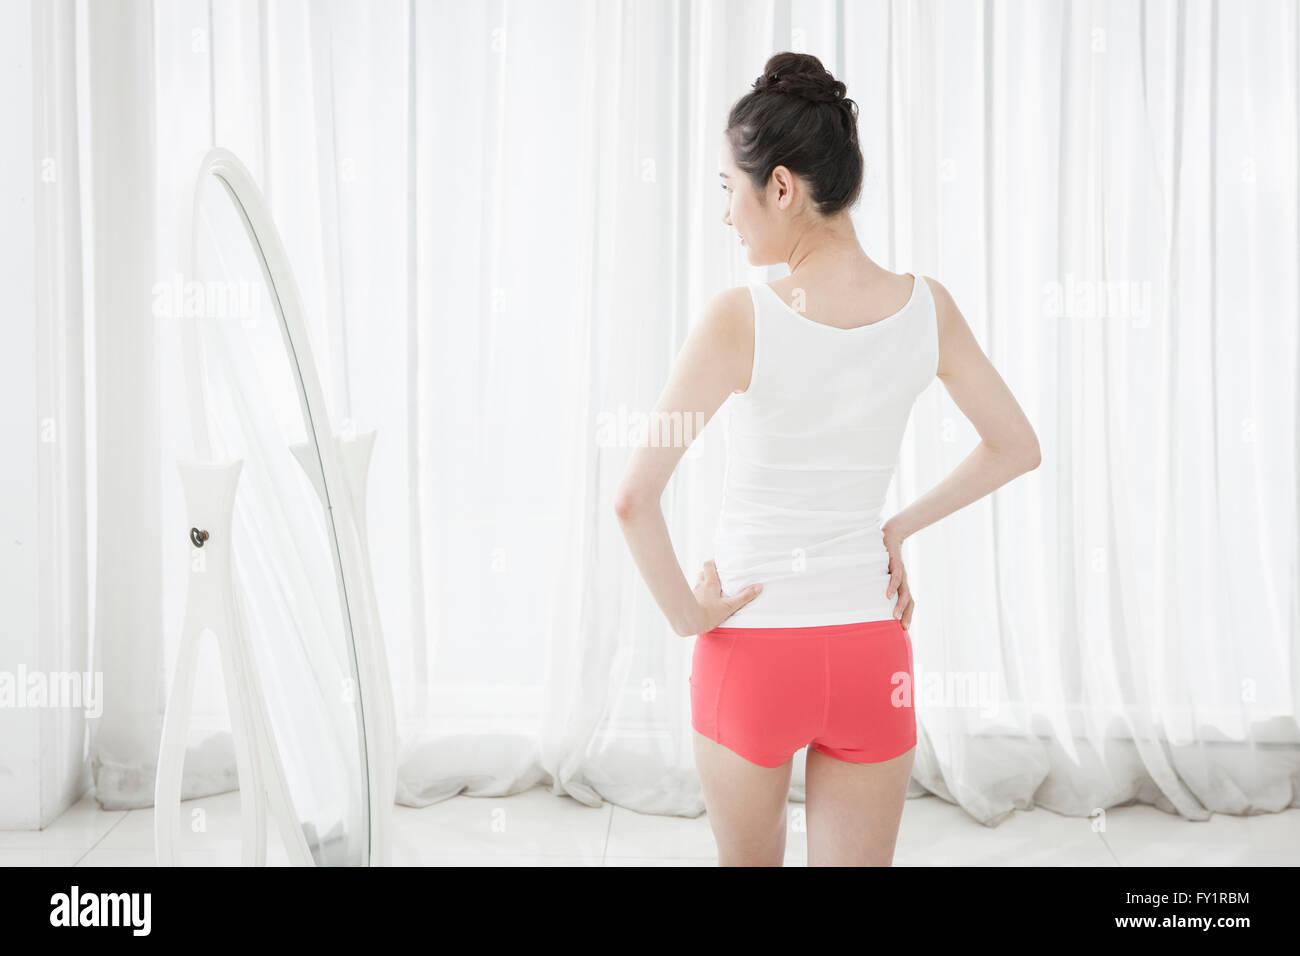 Back of young slim woman standing in front of mirror Stock Photo